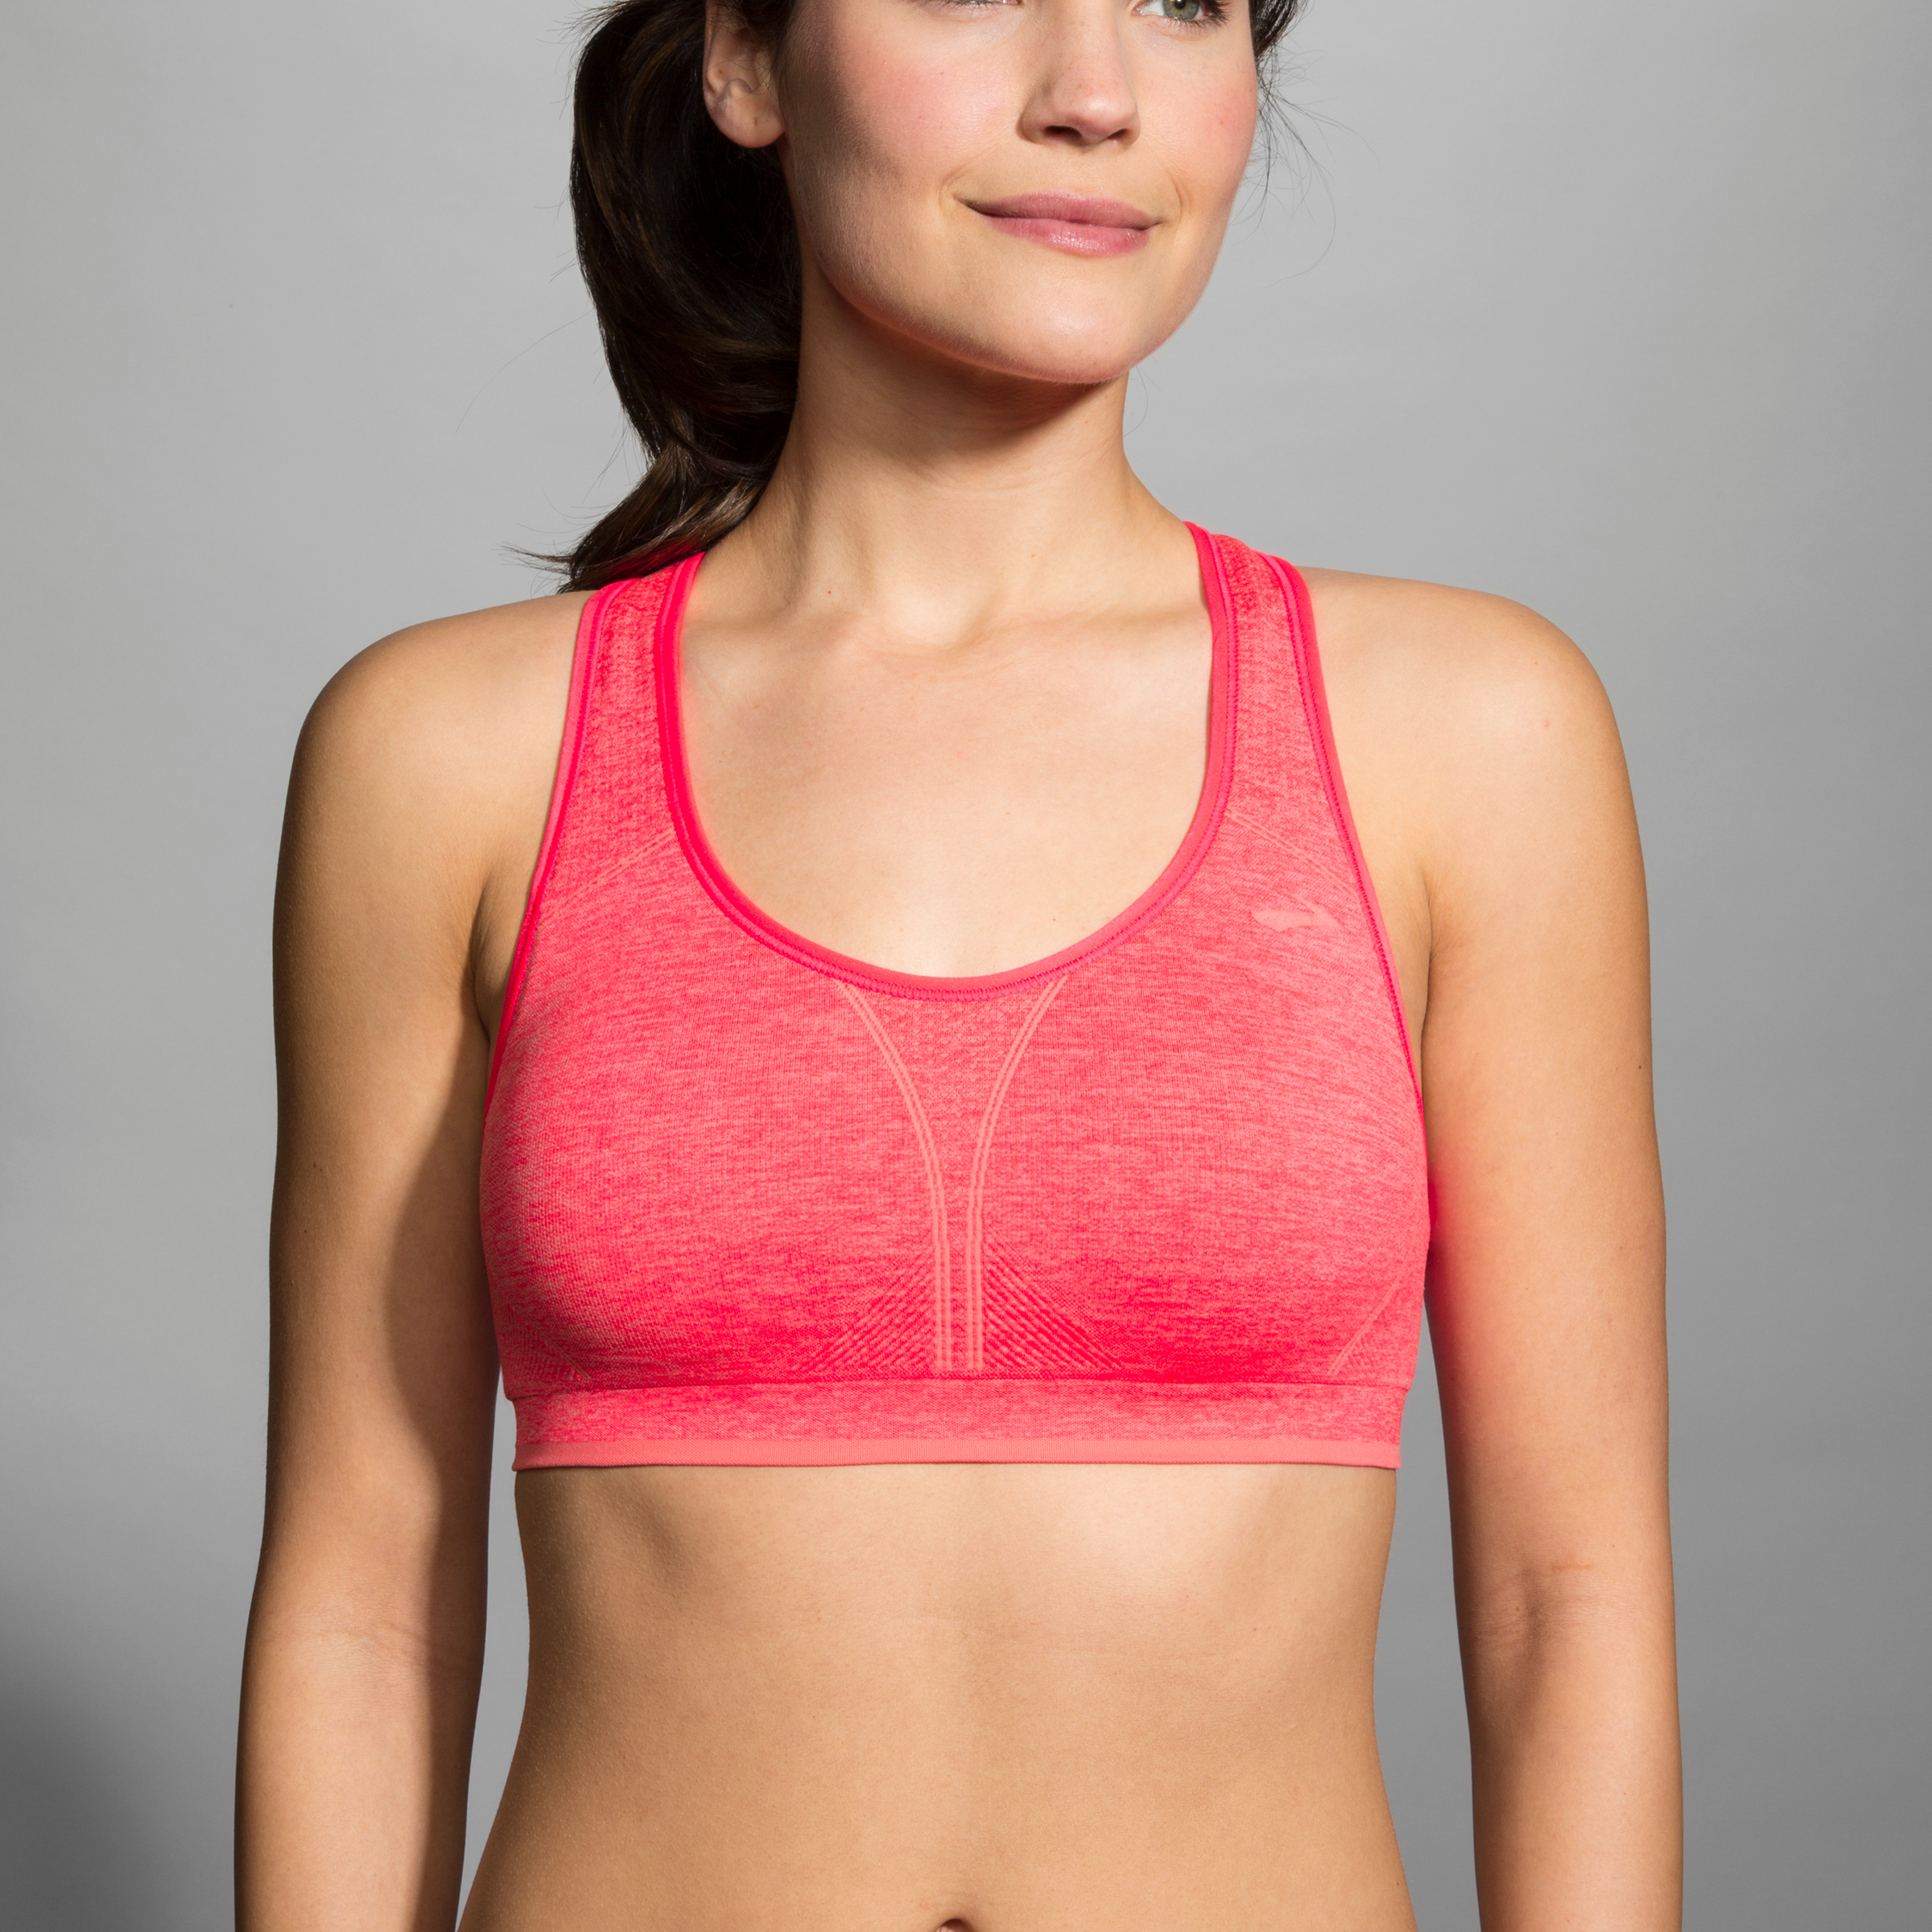 How to Update Last Year's Sports Bras With Motivational Sayings - Brit + Co